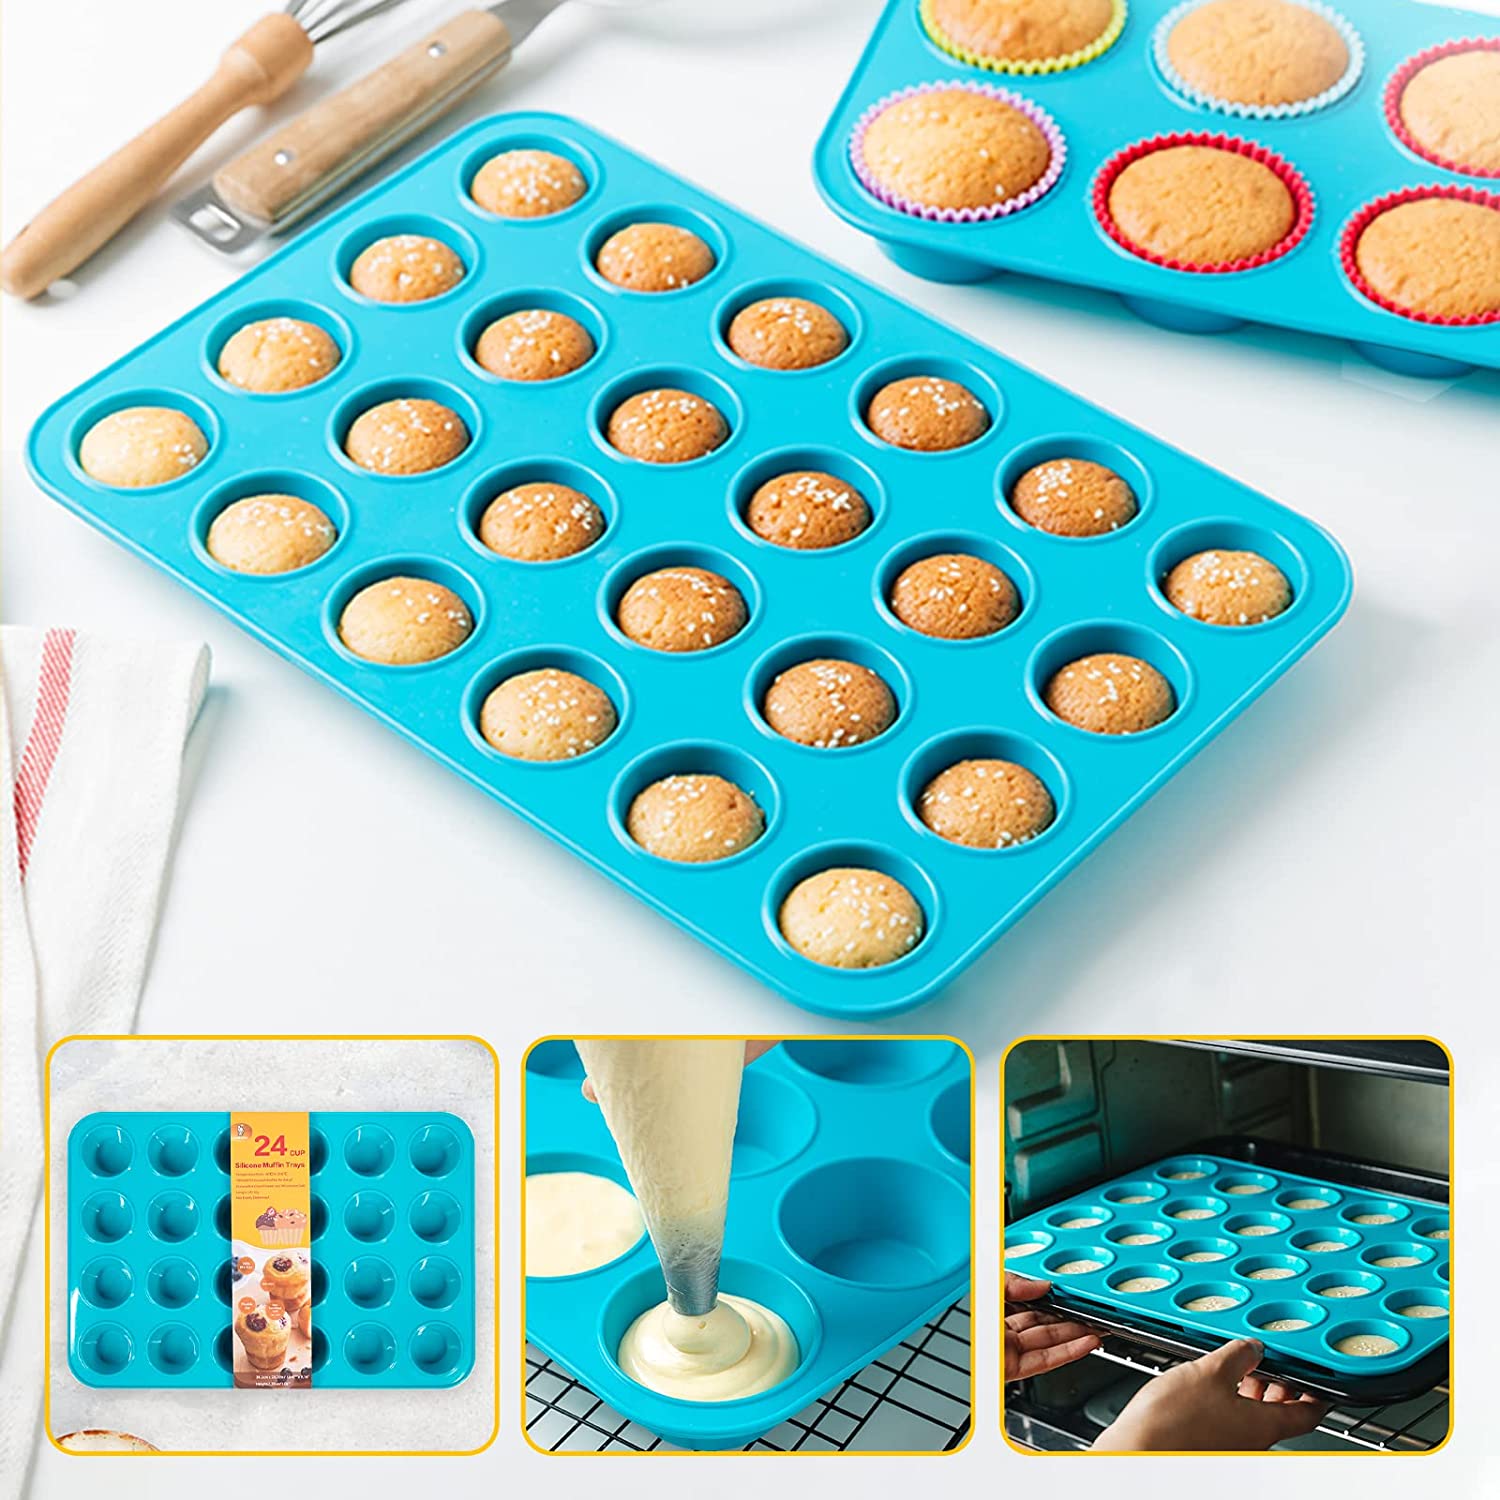 La Chat Silicone Muffin Pan 2 pcs- Nonstick BPA Free silicone Cupcake tray  for baking, 24 Cup, Silicone molds for making Muffins, Cupcakes and Egg